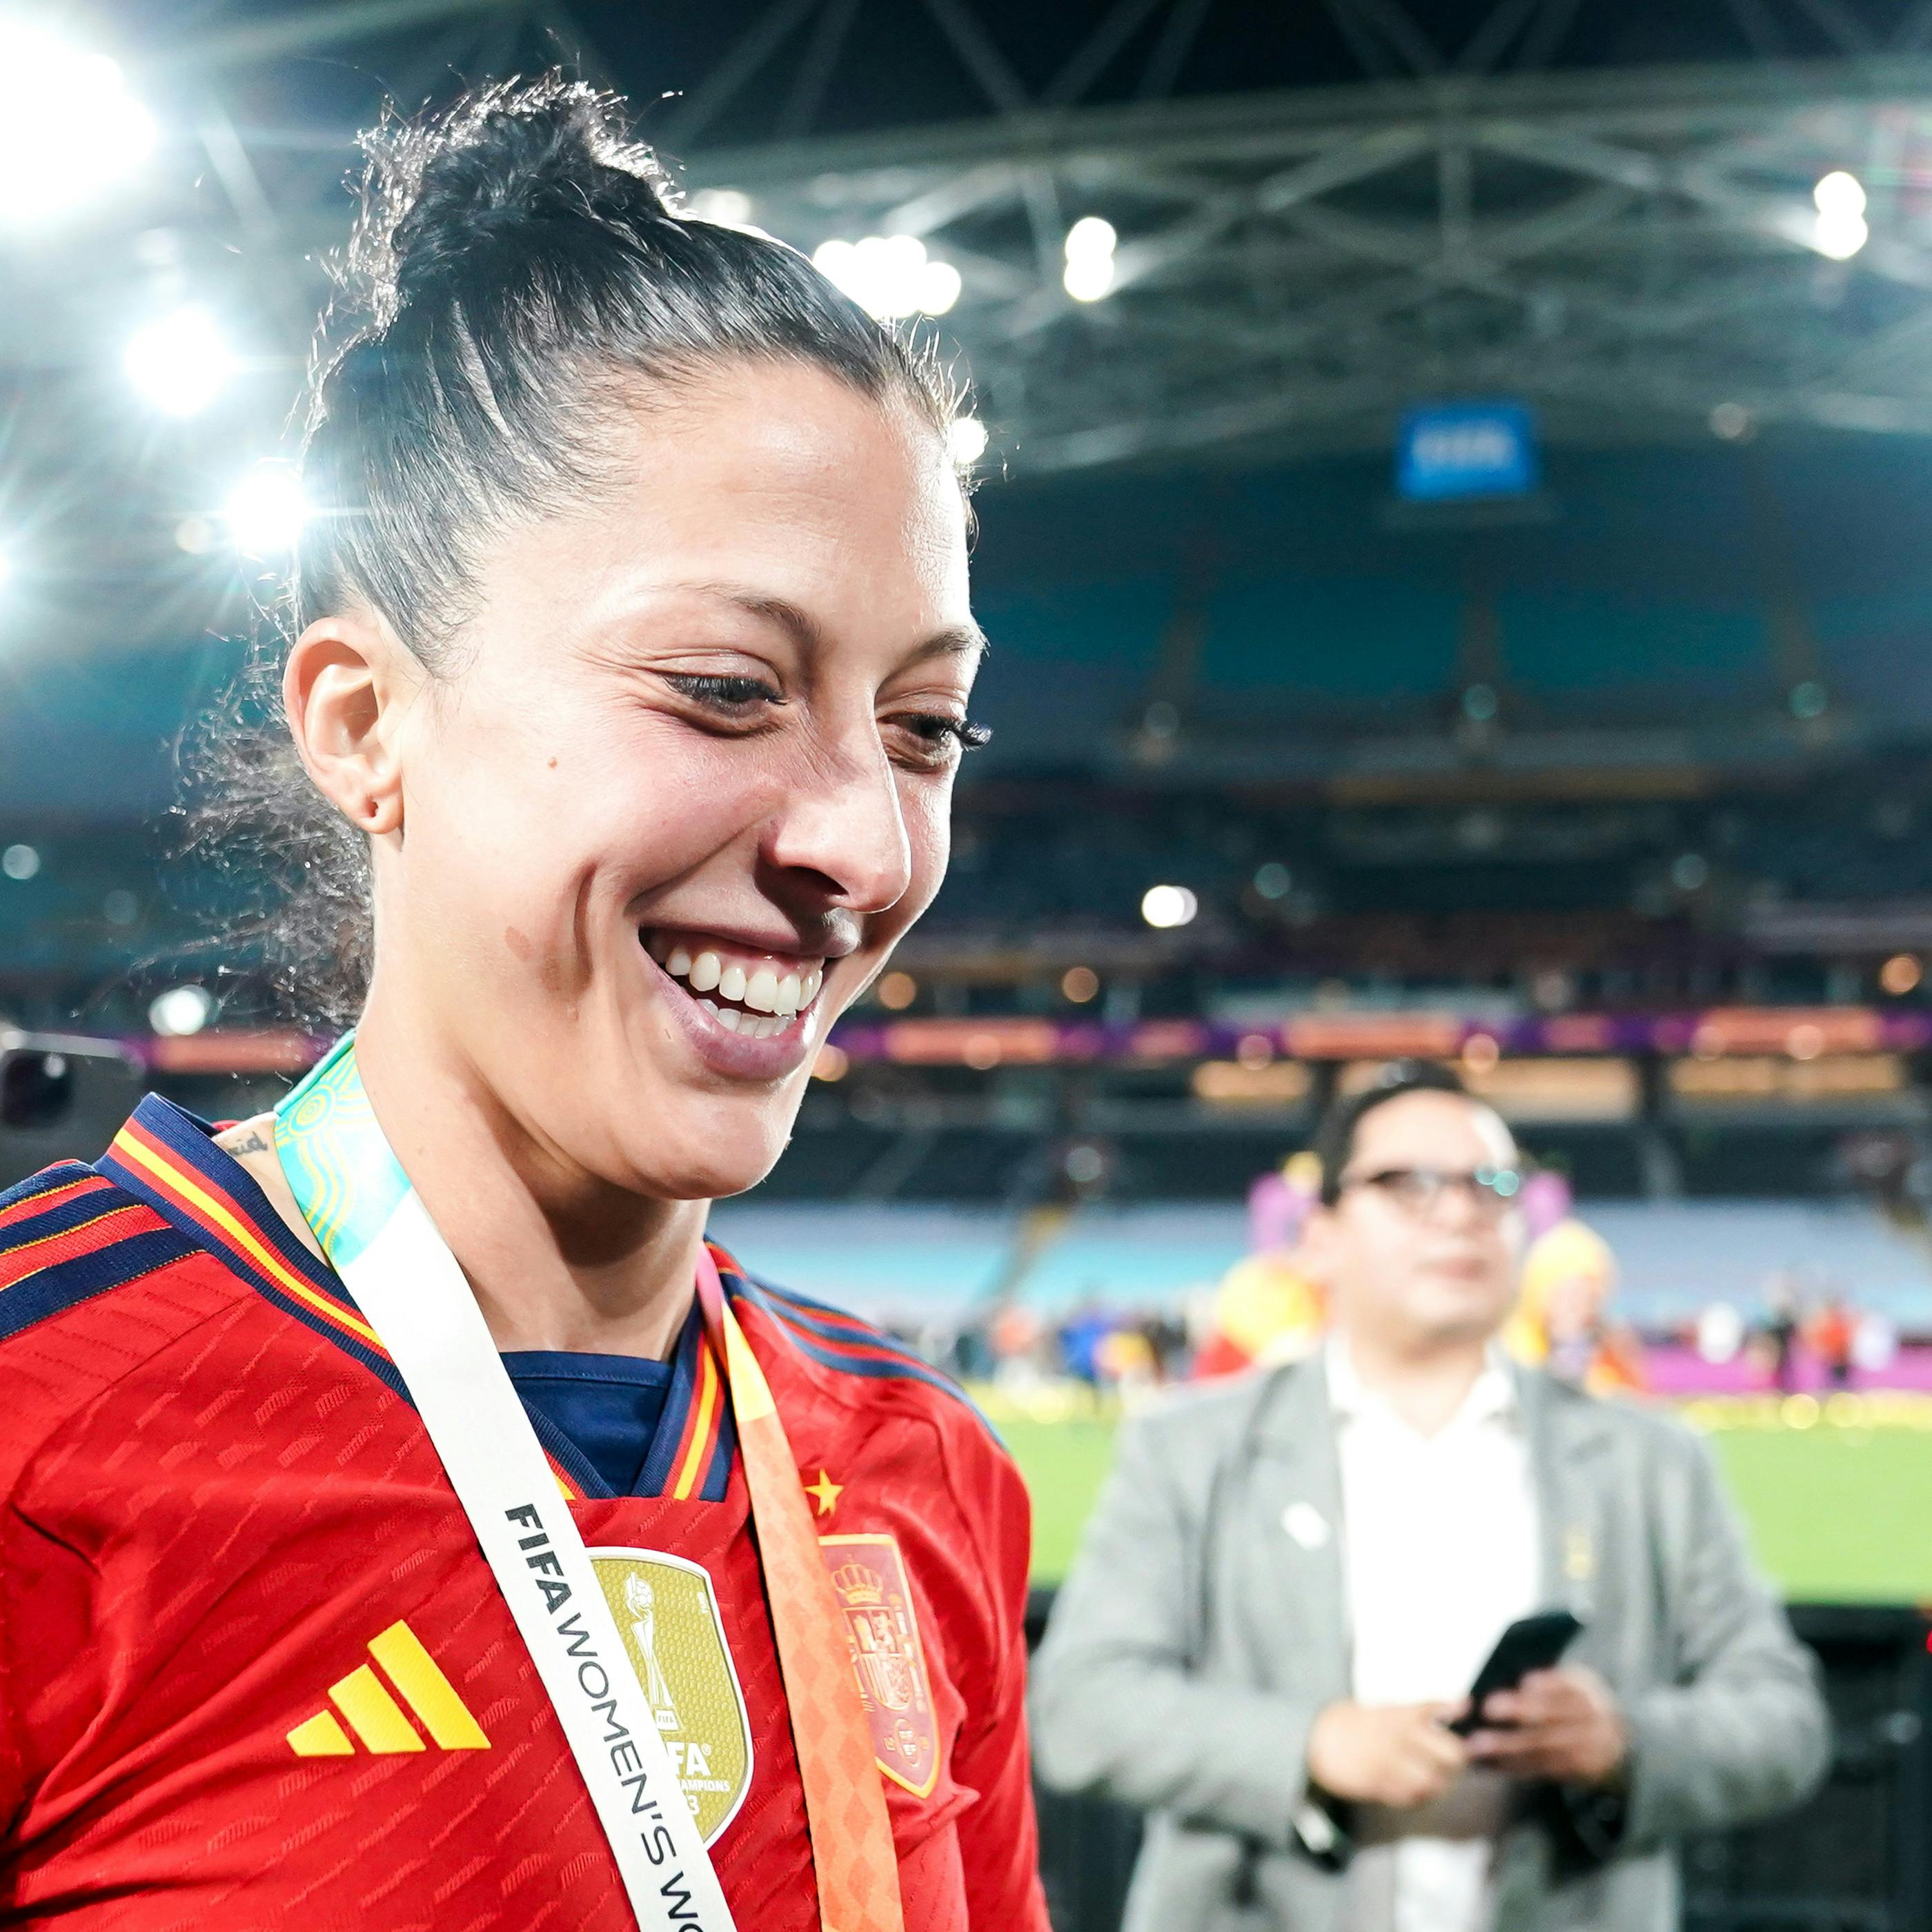 Sydney, Australia, August 20th 2023: Portrait (headshot/close up) of Jenni Hermoso (10 Spain) after winning the World Cup during the FIFA Womens World Cup 2023 Final football match between Spain and England at Stadium Australia in Sydney, Australia. (Daniela Porcelli / SPP) (Photo by Daniela Porcelli / SPP/Sipa USA)